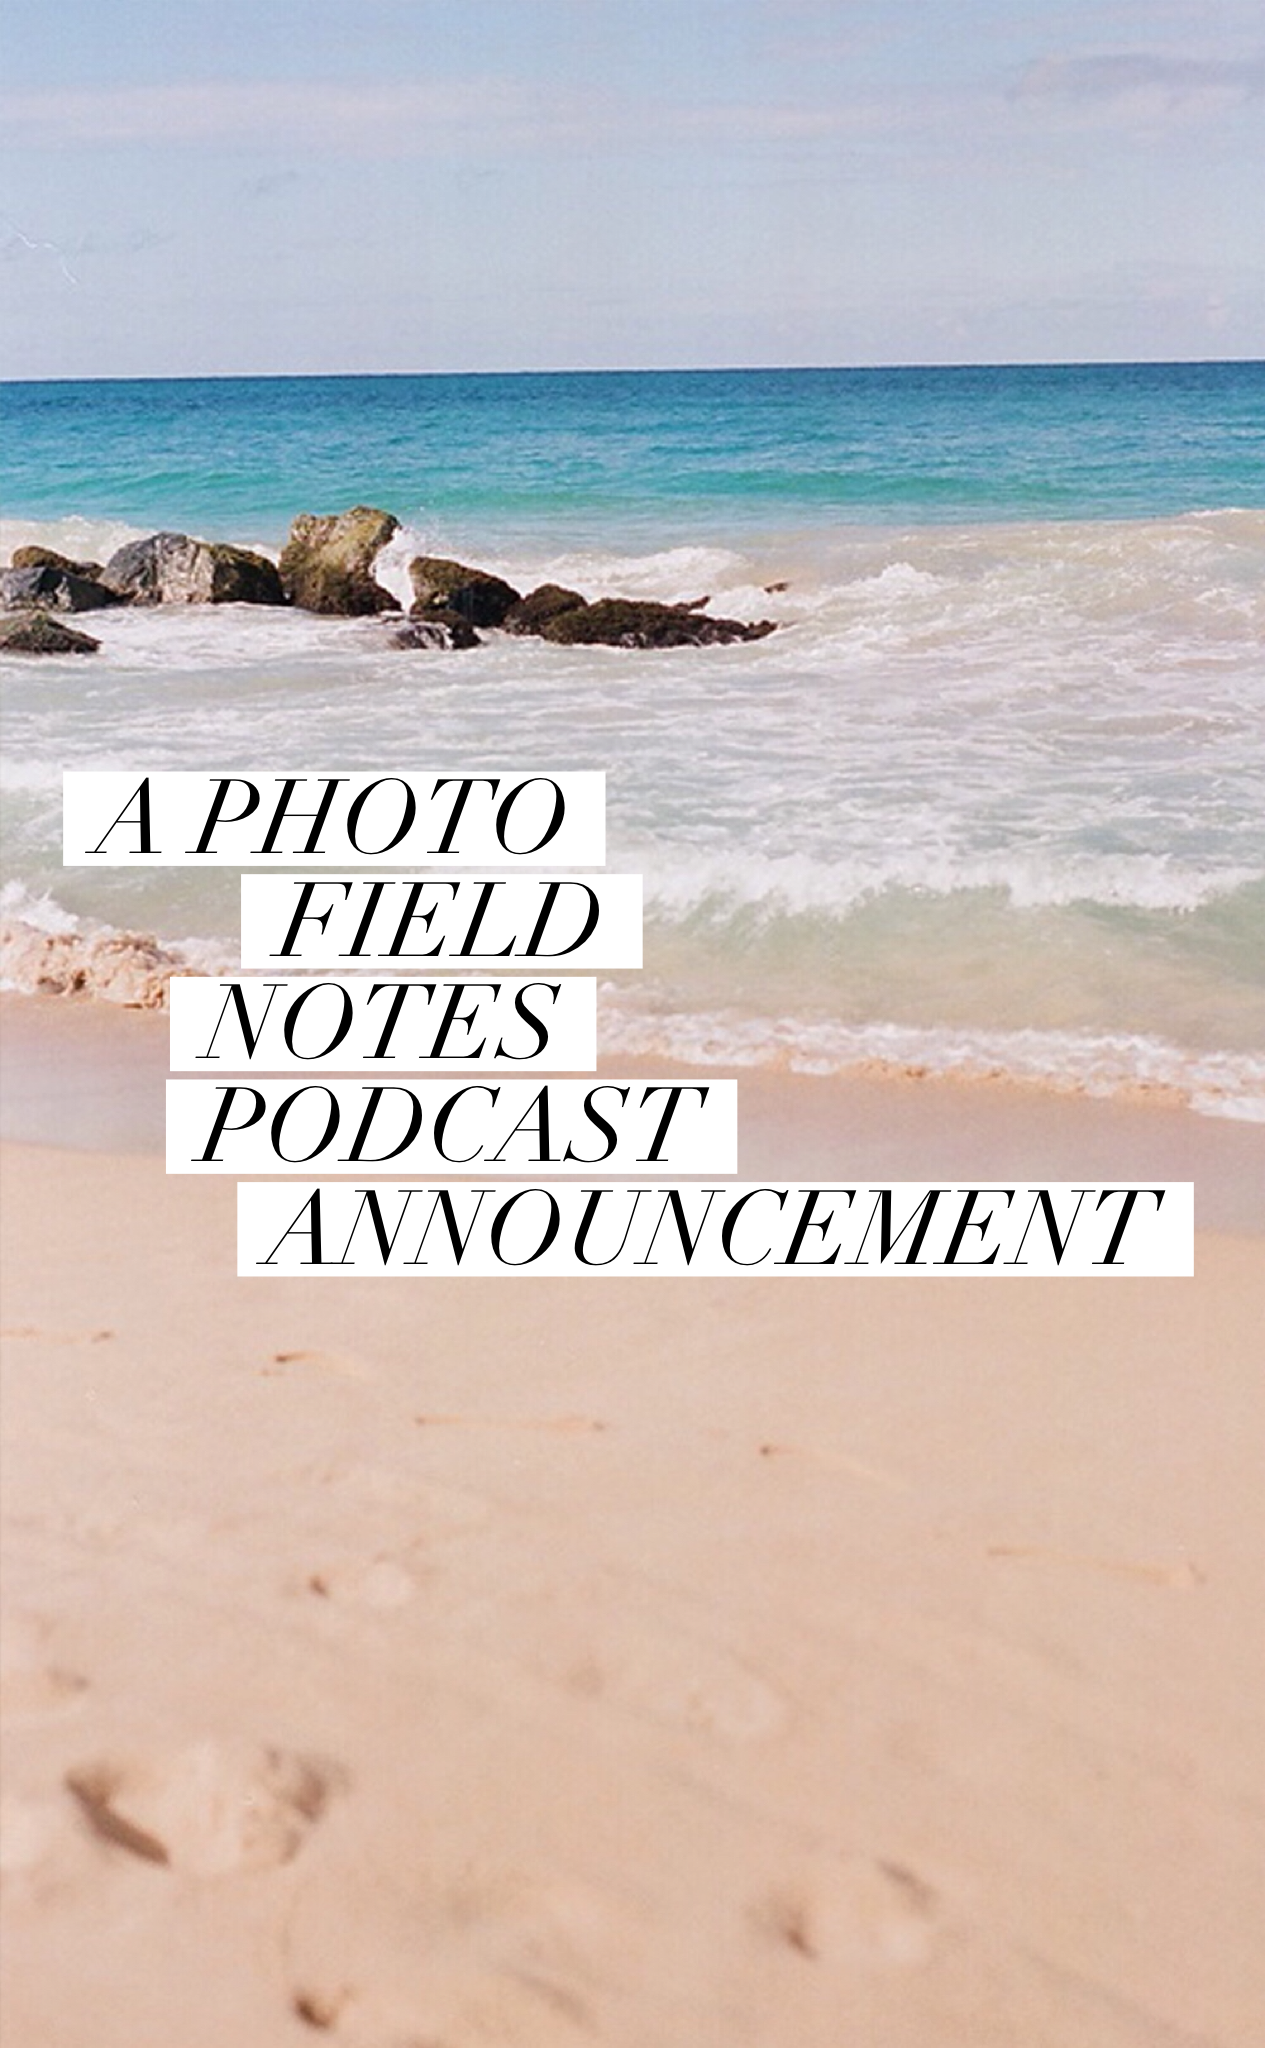 A Photo Field Notes Podcast Announcement